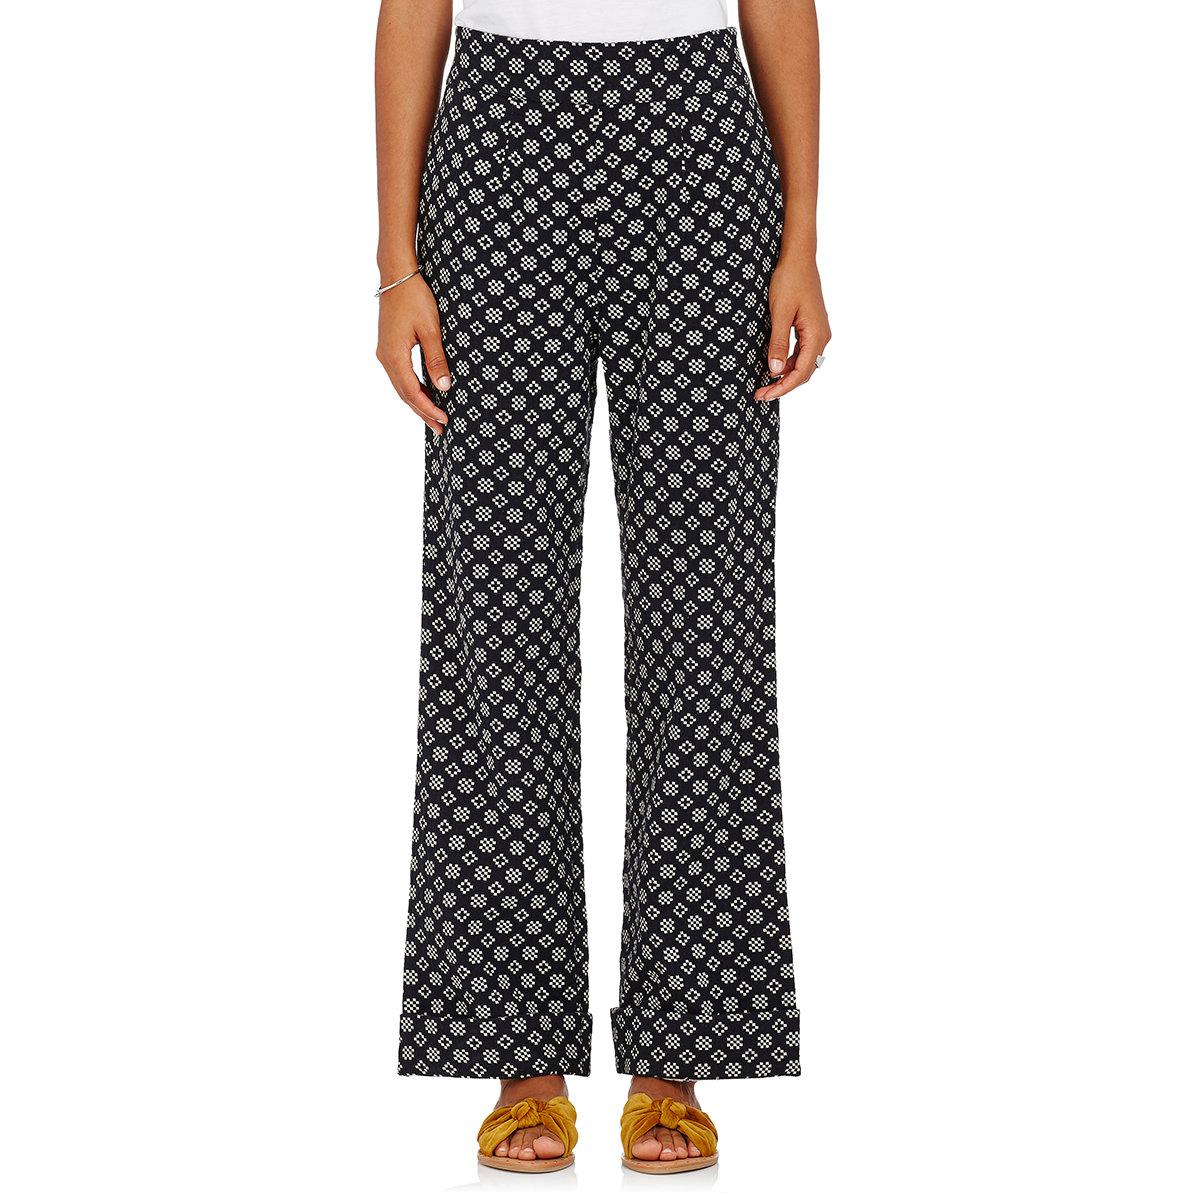 Lyst - Ace & Jig Annie Folkloric Cotton Pants in Black